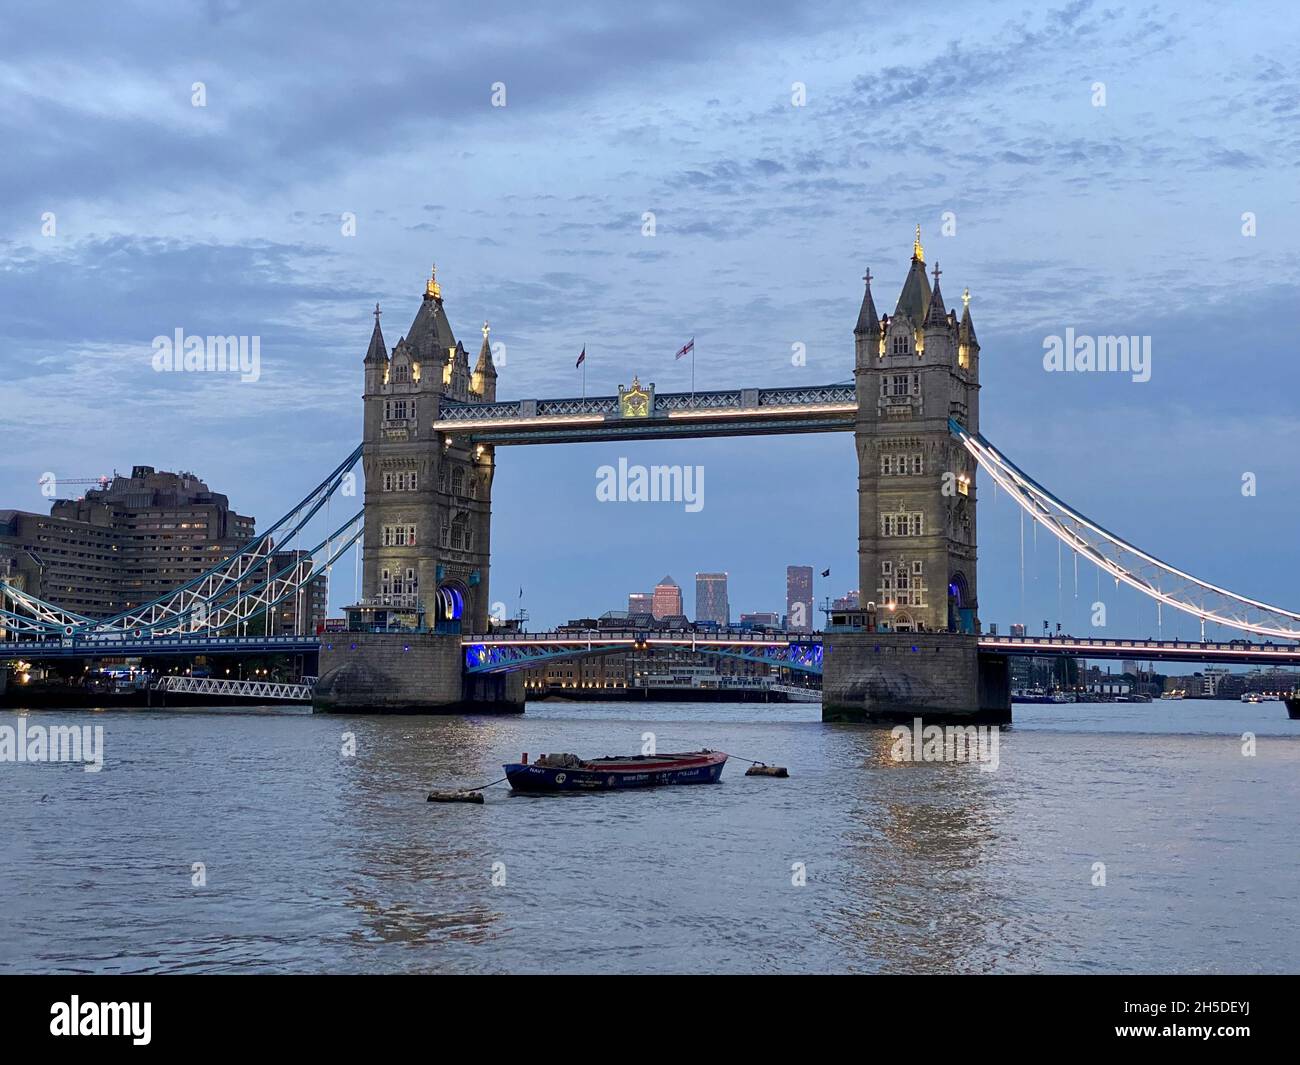 LONDON, UNITED KINGDOM - Aug 14, 2021: A beautiful view of the Tower Bridge, London, UK under the cloudy blue sky Stock Photo